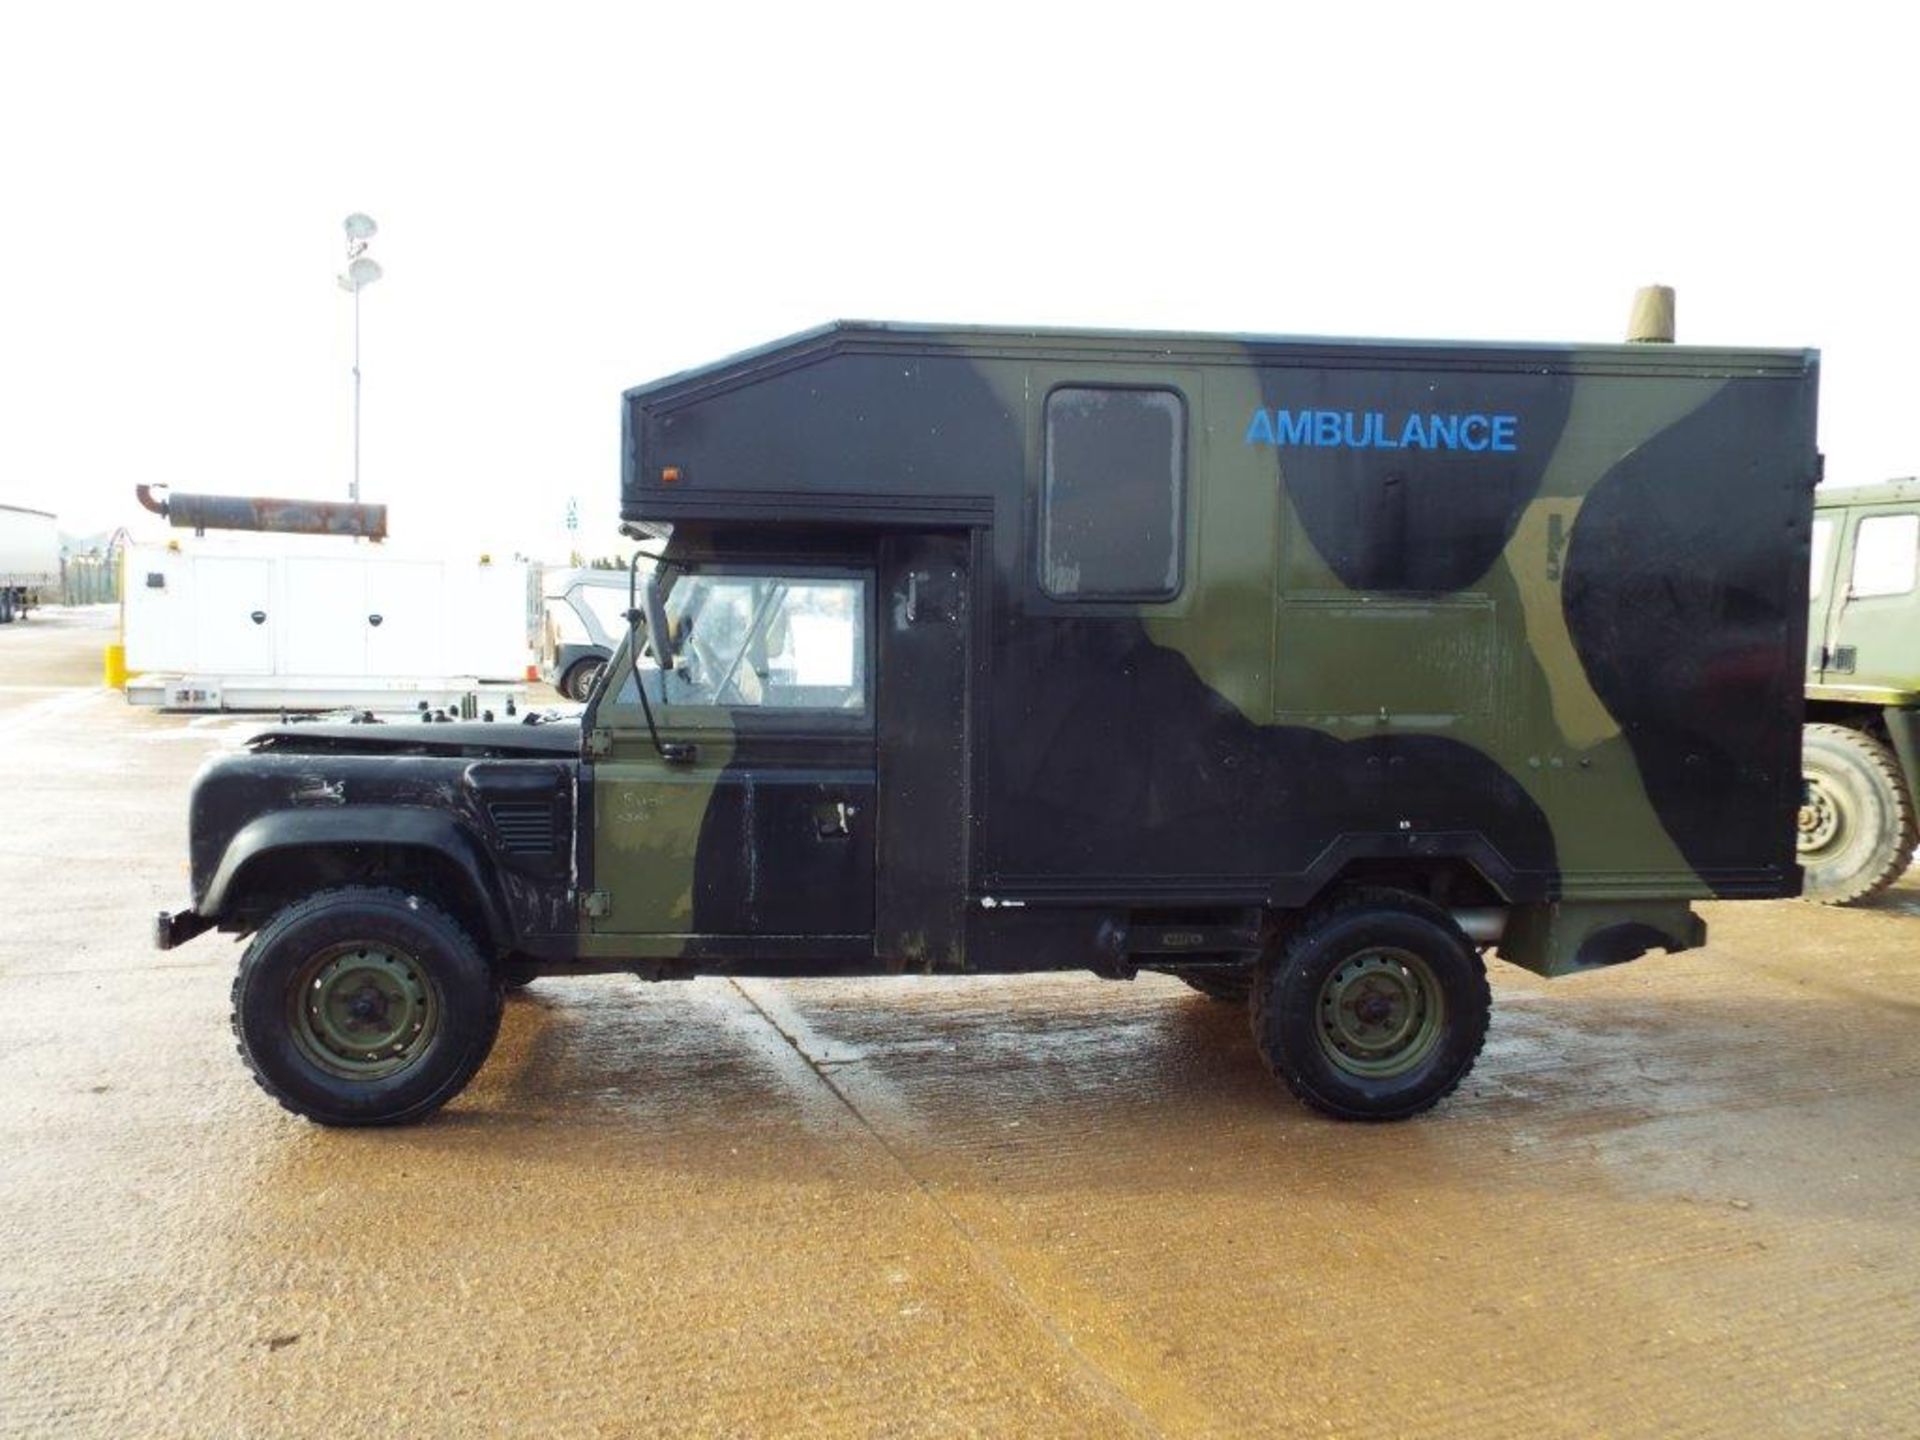 Military Specification LHD Land Rover Wolf 130 ambulance - Image 4 of 23